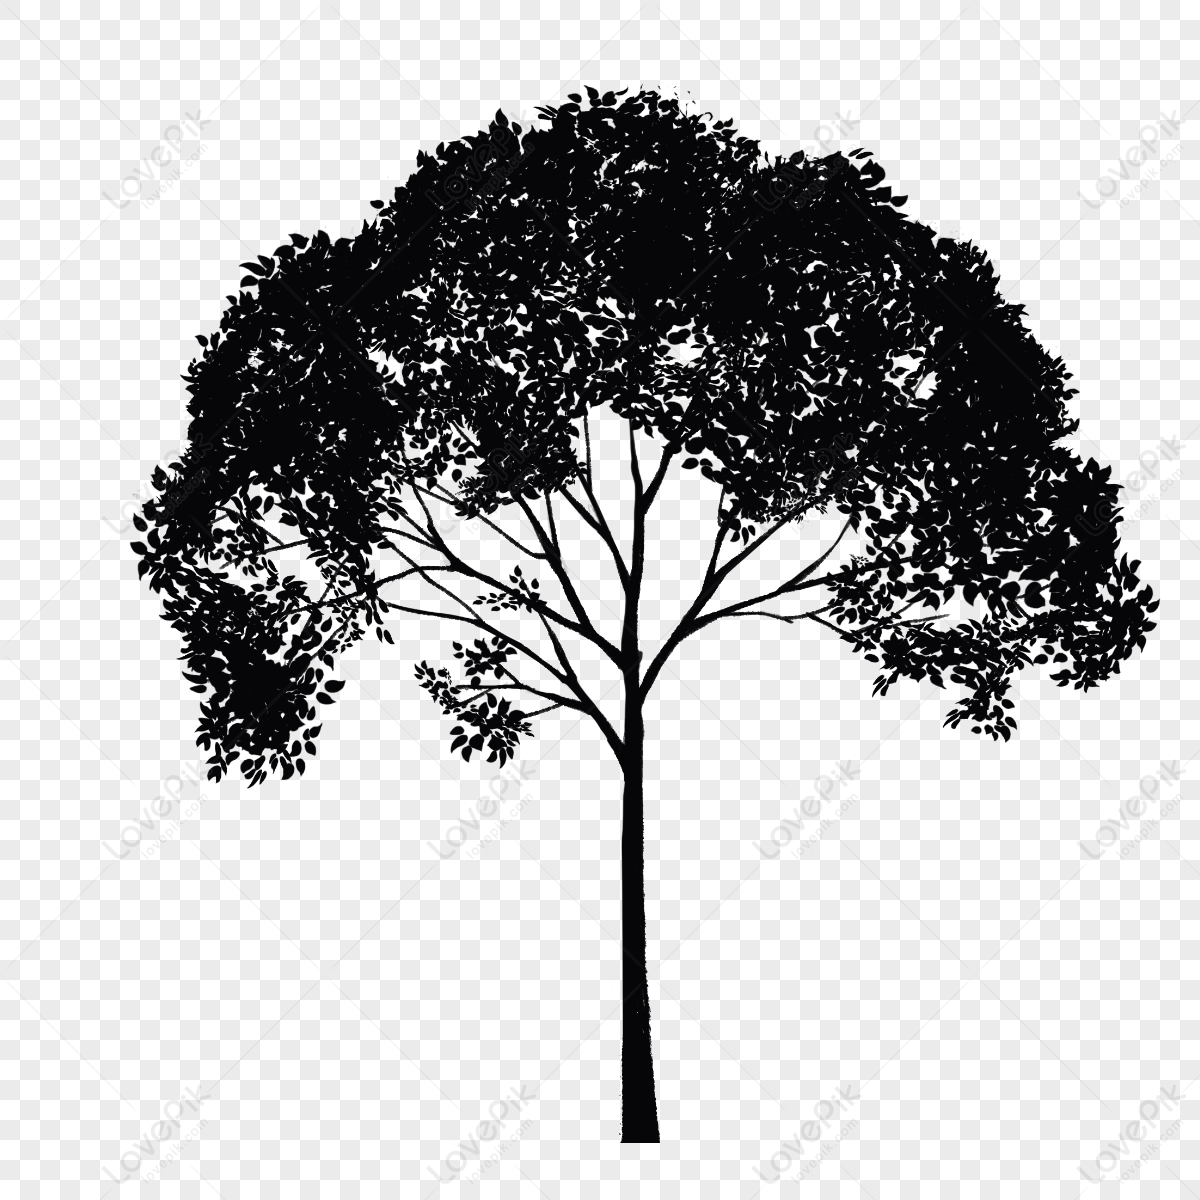 The silhouette of the big tree, tree white, light tree, tree wood png free download